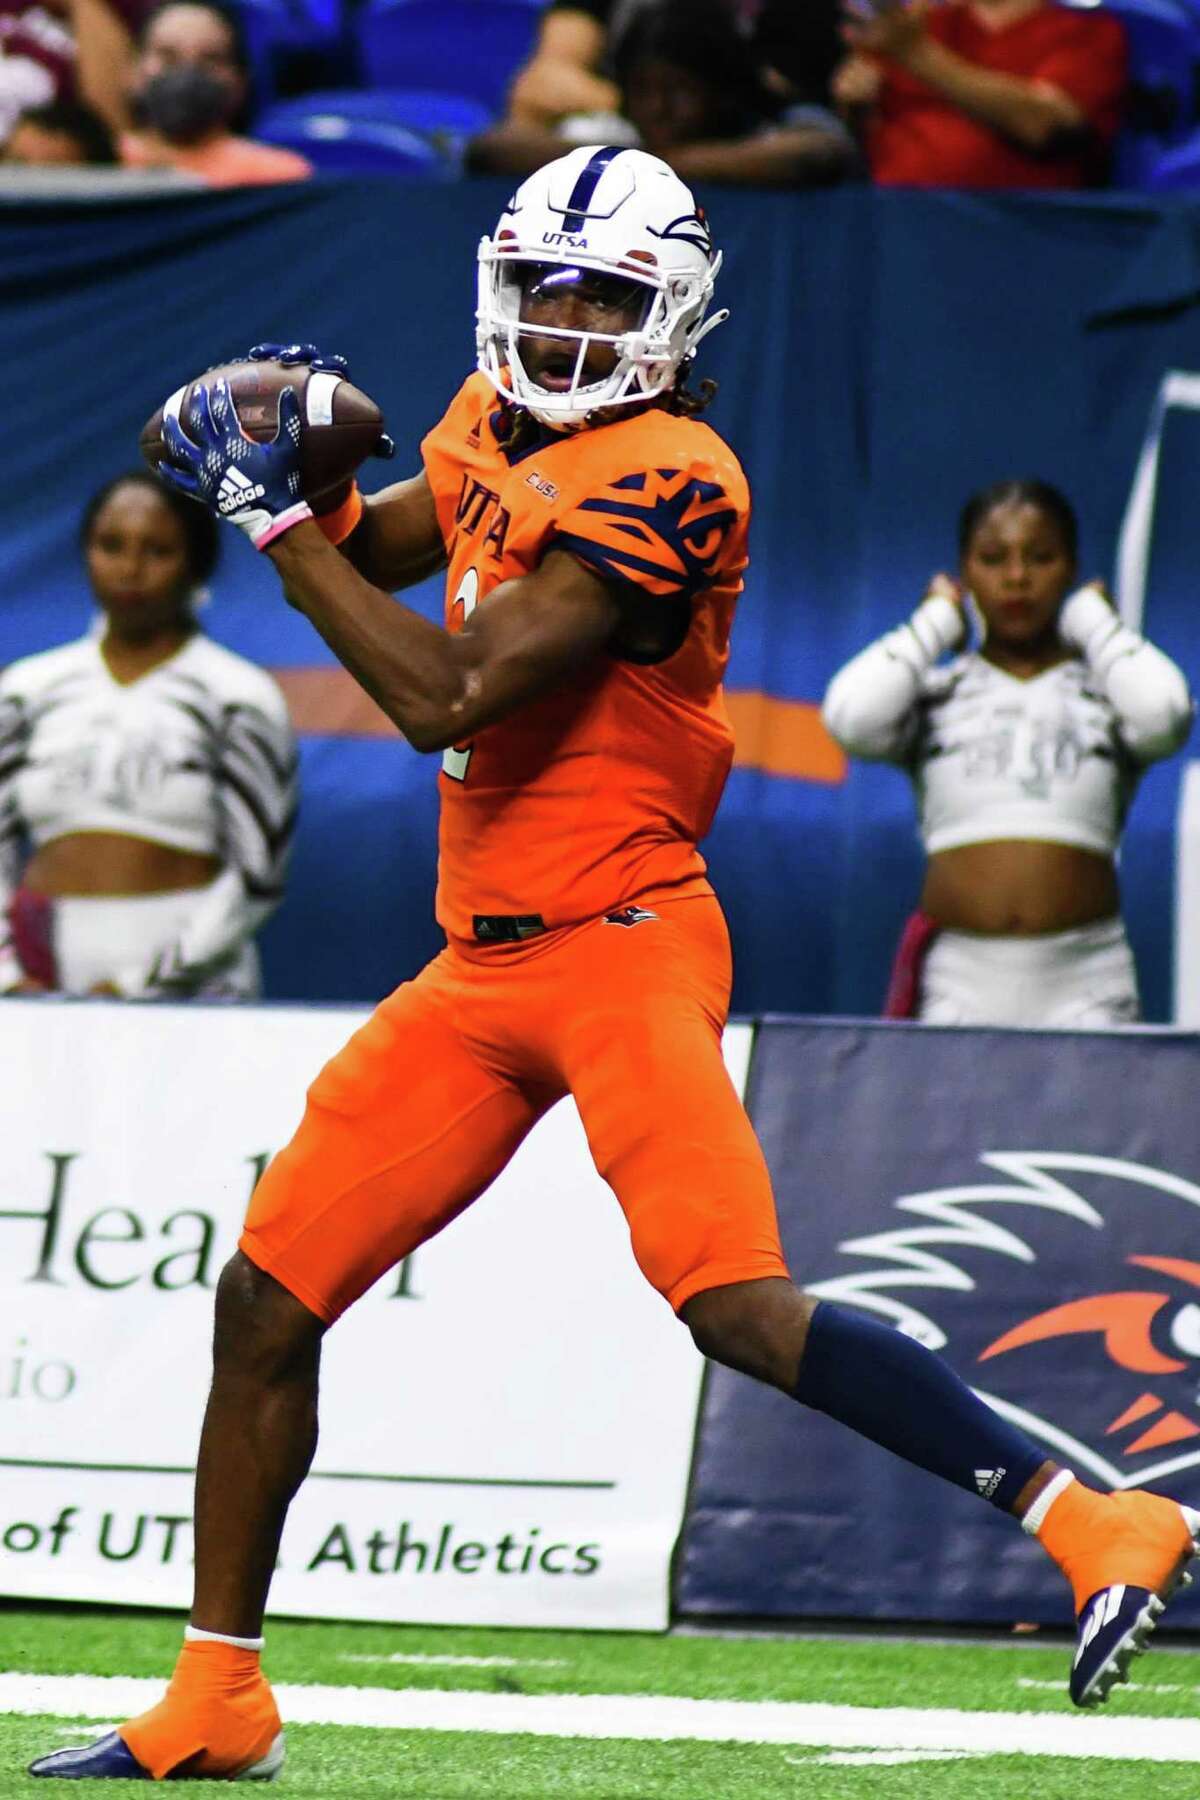 UTSA wide receiver Joshua Cephus (2) halls in a pass for a touchdown during the fourth quarter of Saturday’s game against Texas Southern at the Alamodome.